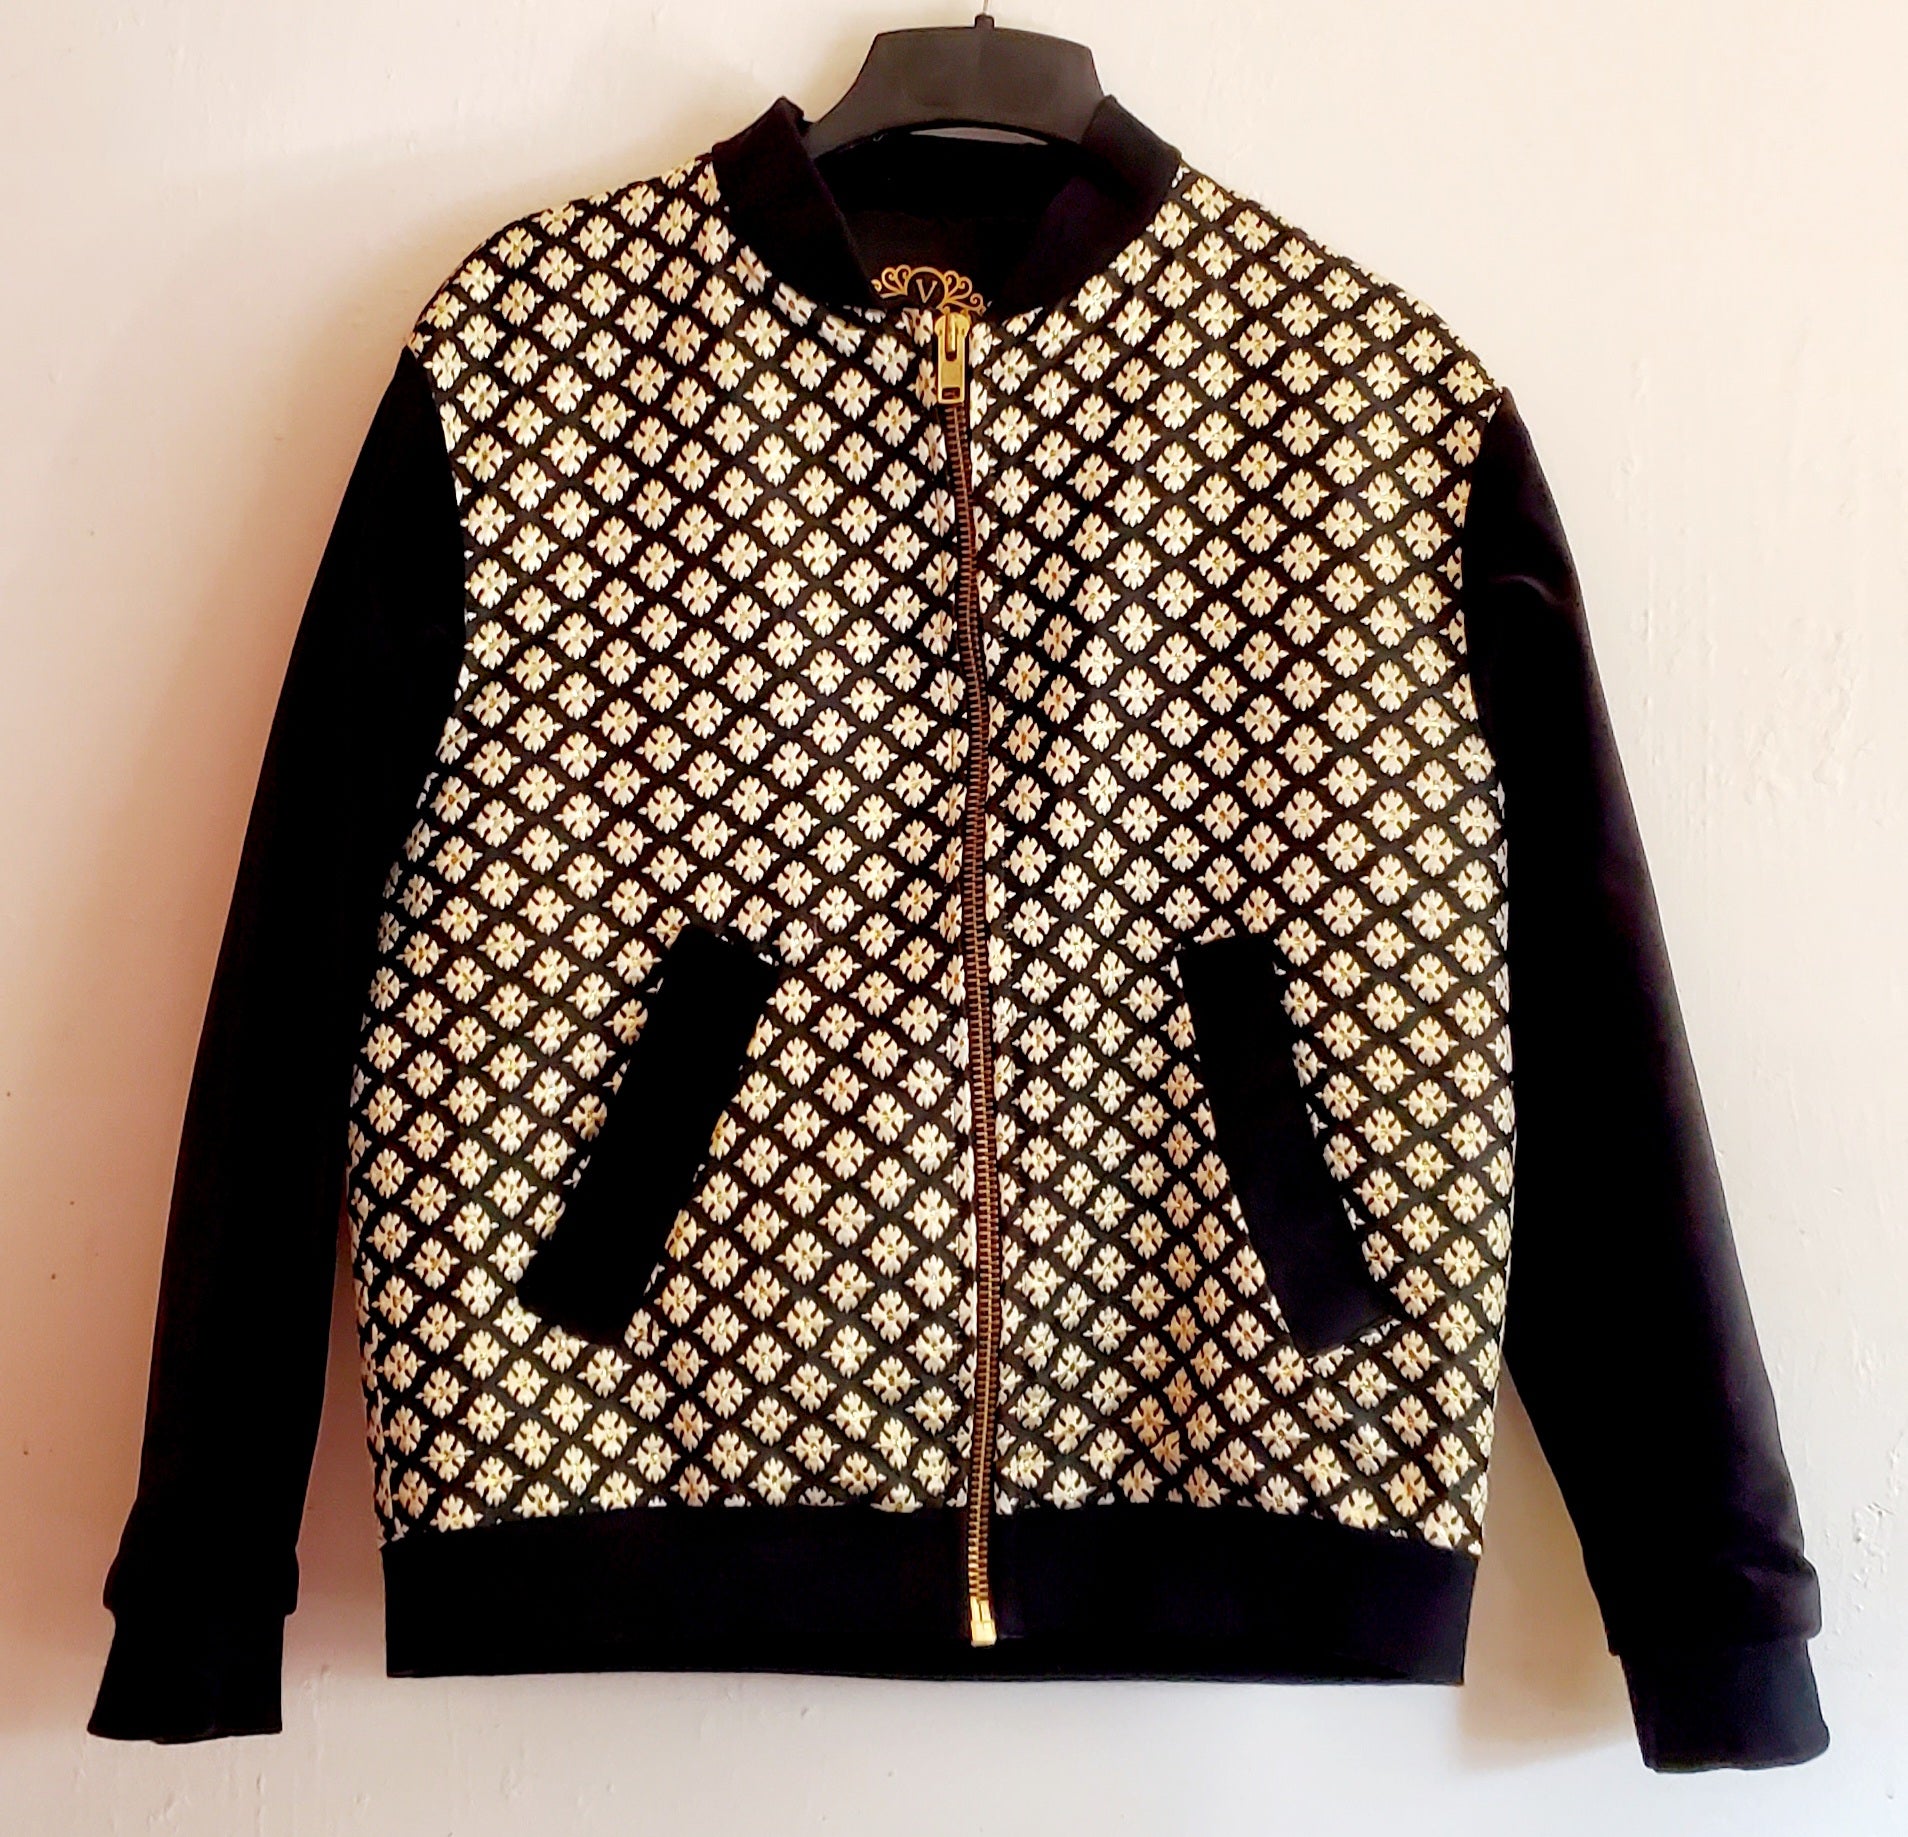 Front view of black and gold brocade bomber jacket on white background.